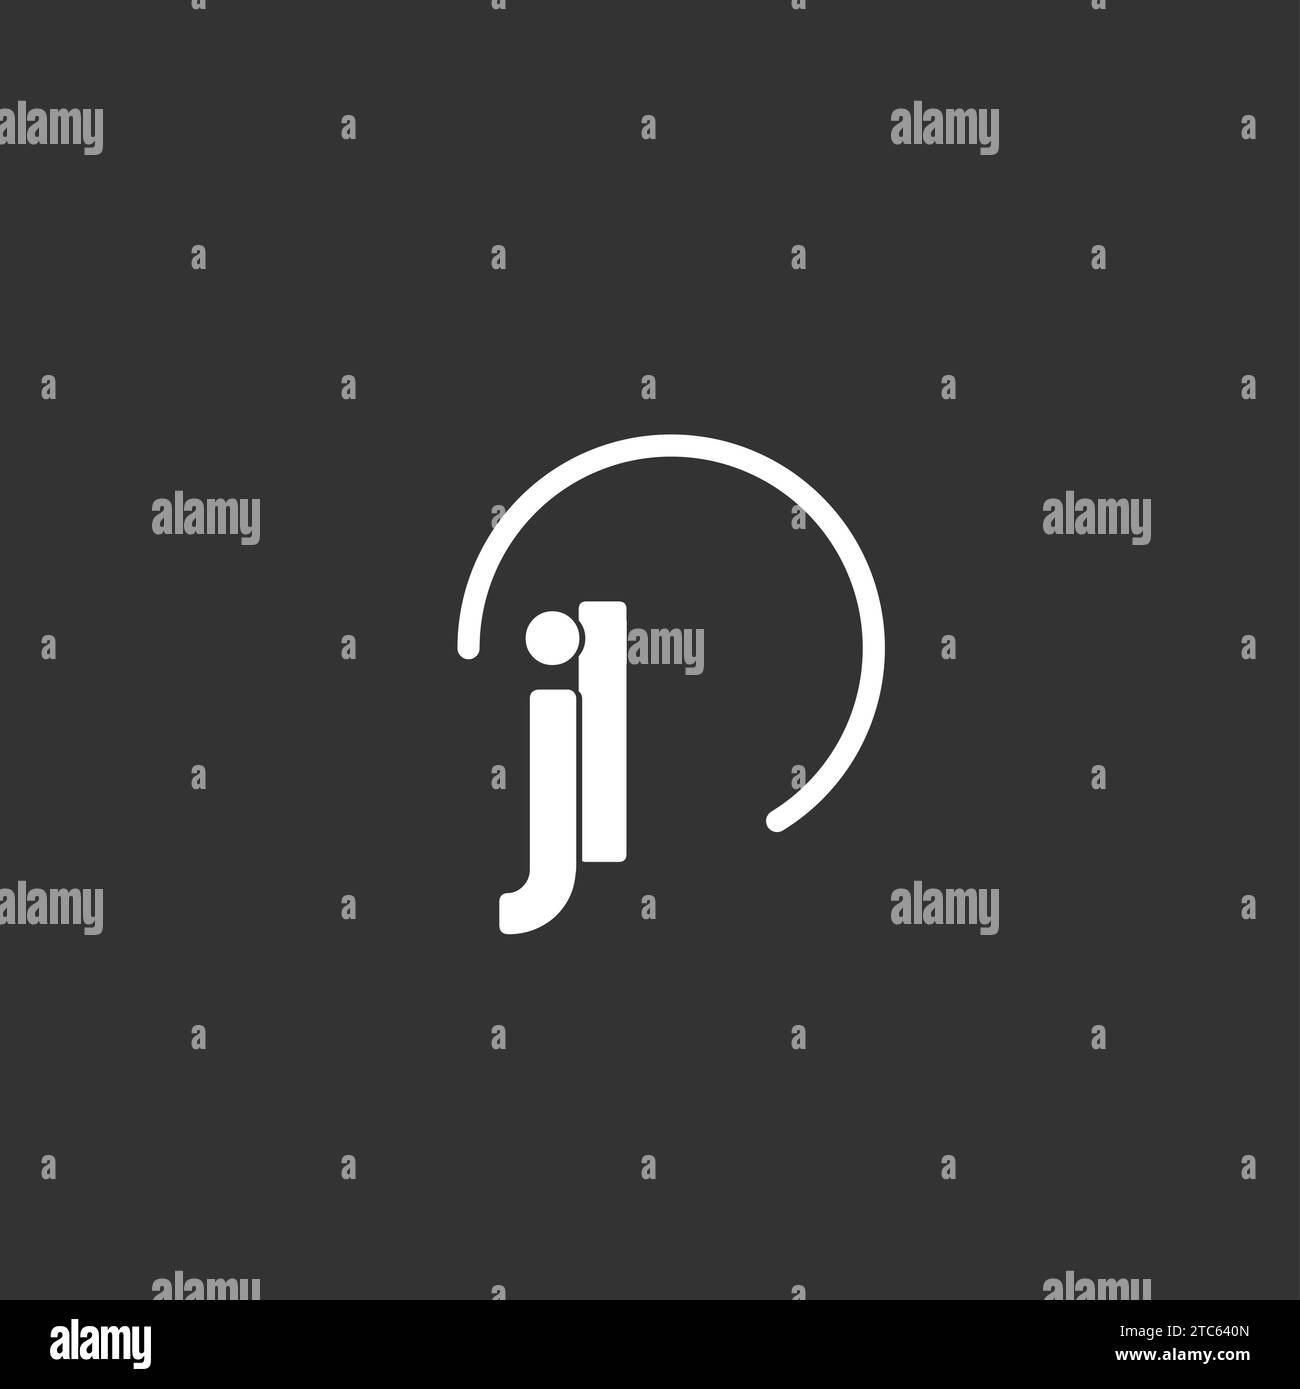 JL initial logo with rounded circle vector graphic Stock Vector